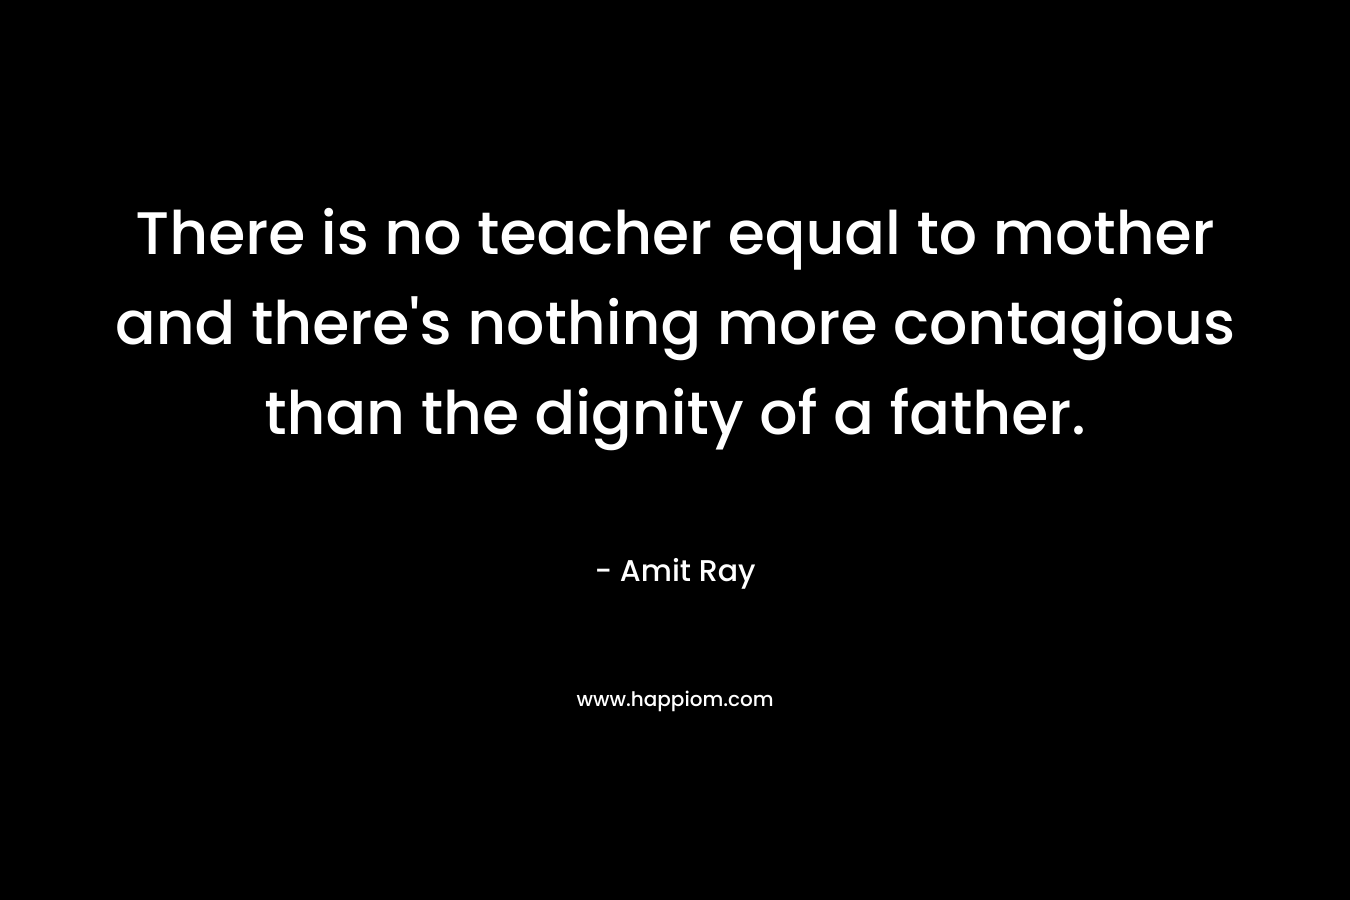 There is no teacher equal to mother and there's nothing more contagious than the dignity of a father.